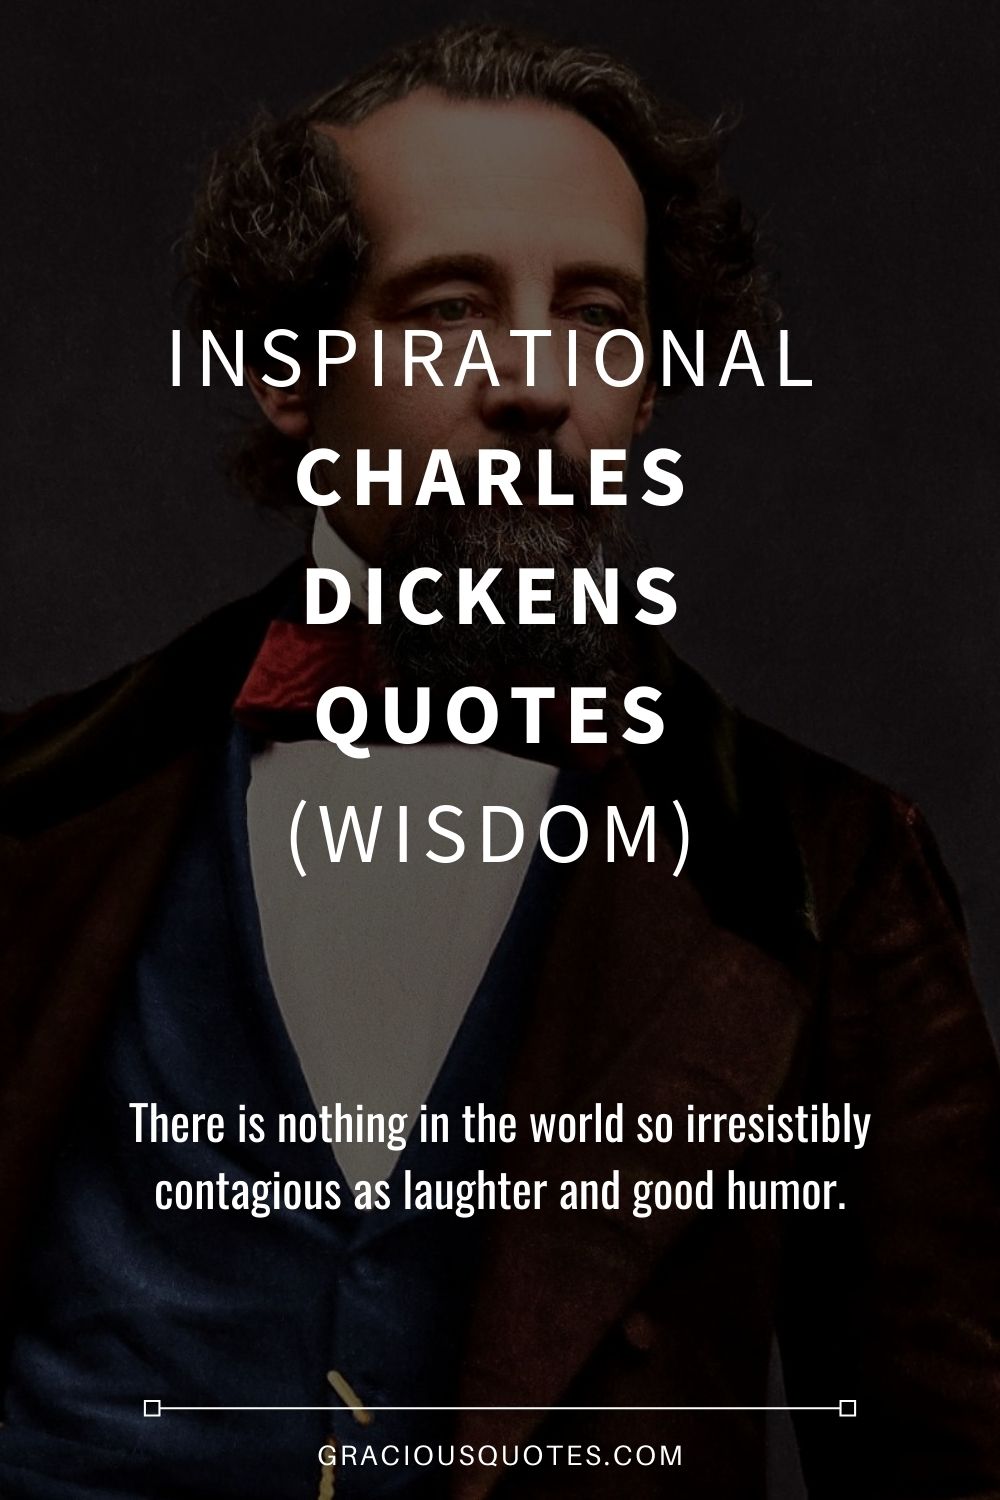 Inspirational Charles Dickens Quotes (WISDOM) - Gracious Quotes